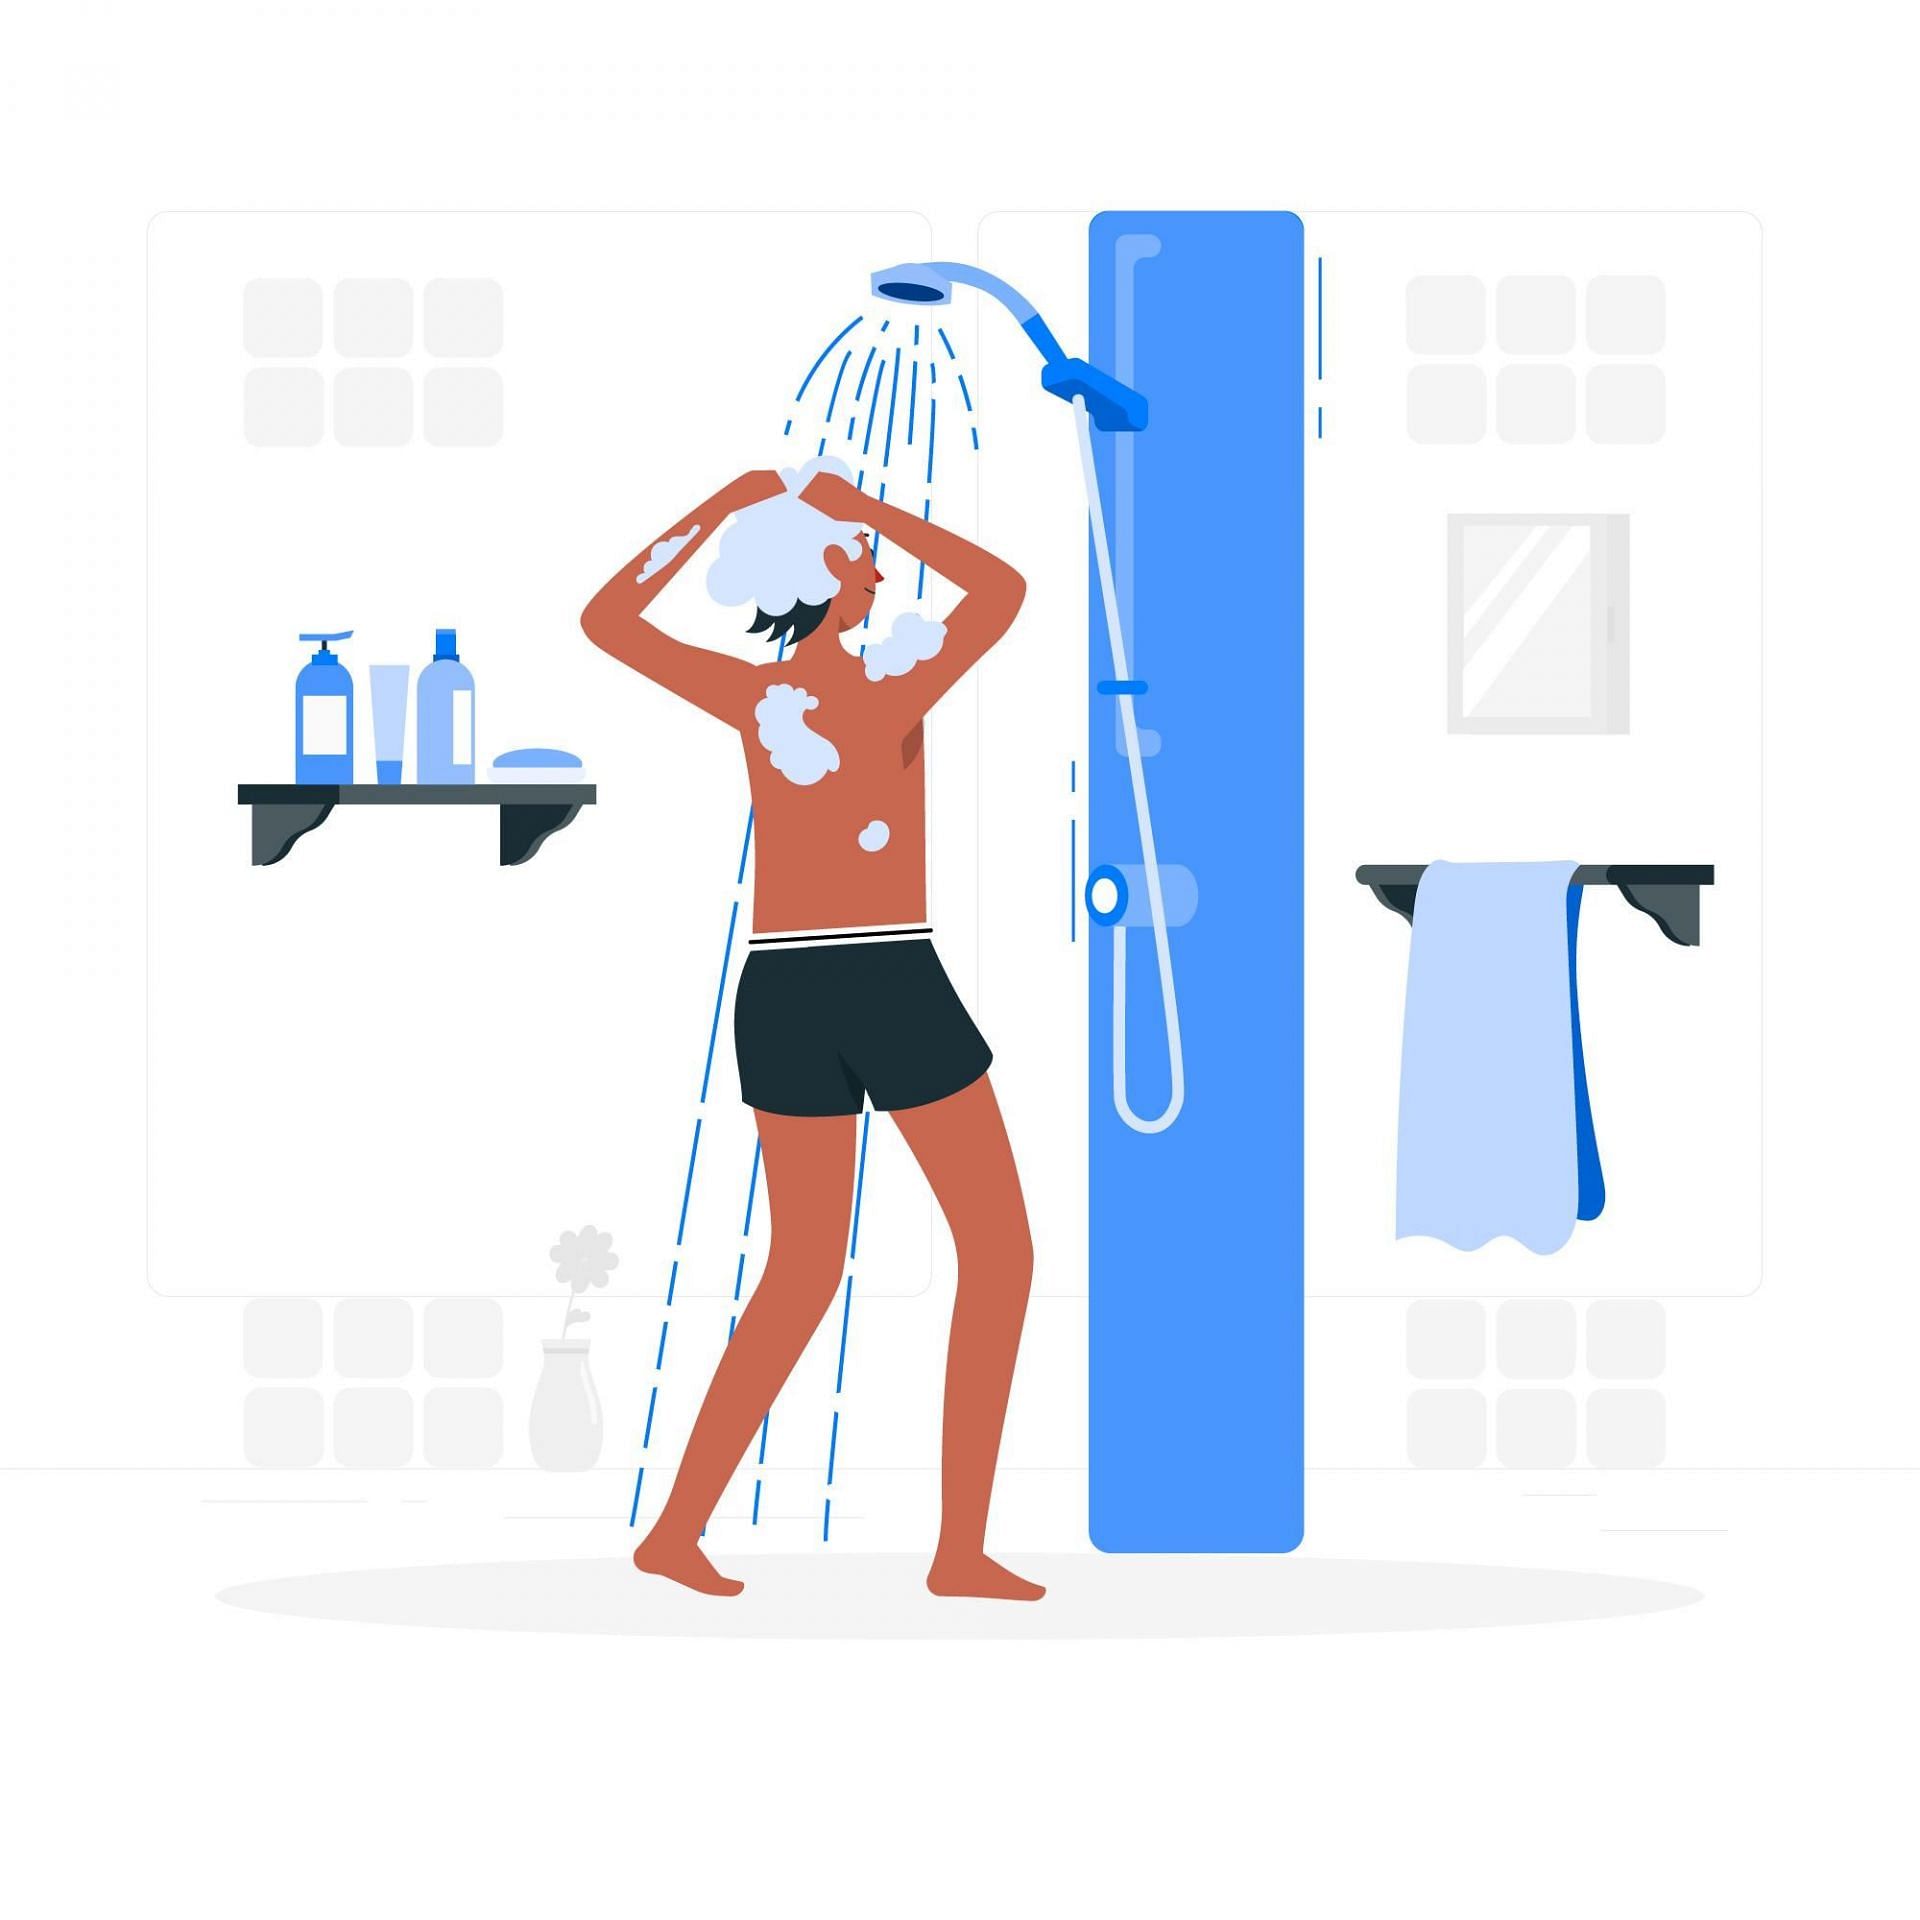 Although not the first choice for everyone, cold showers can really impact our mental health. (Image via Freepik/ Storyset)